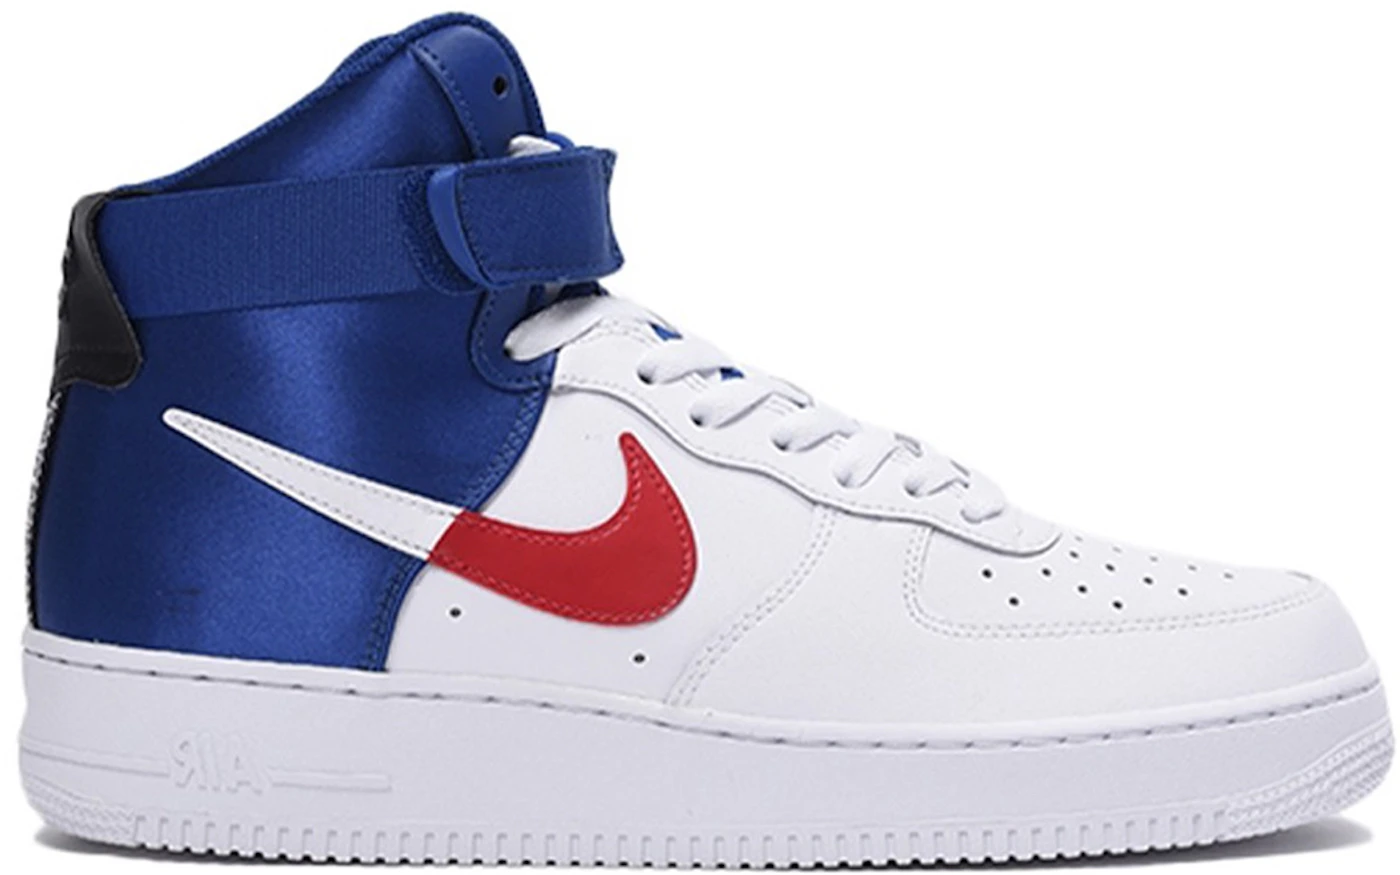 Nike Air Force 1 '07 LV8 High NBA Clippers Men's - Sneakers - US